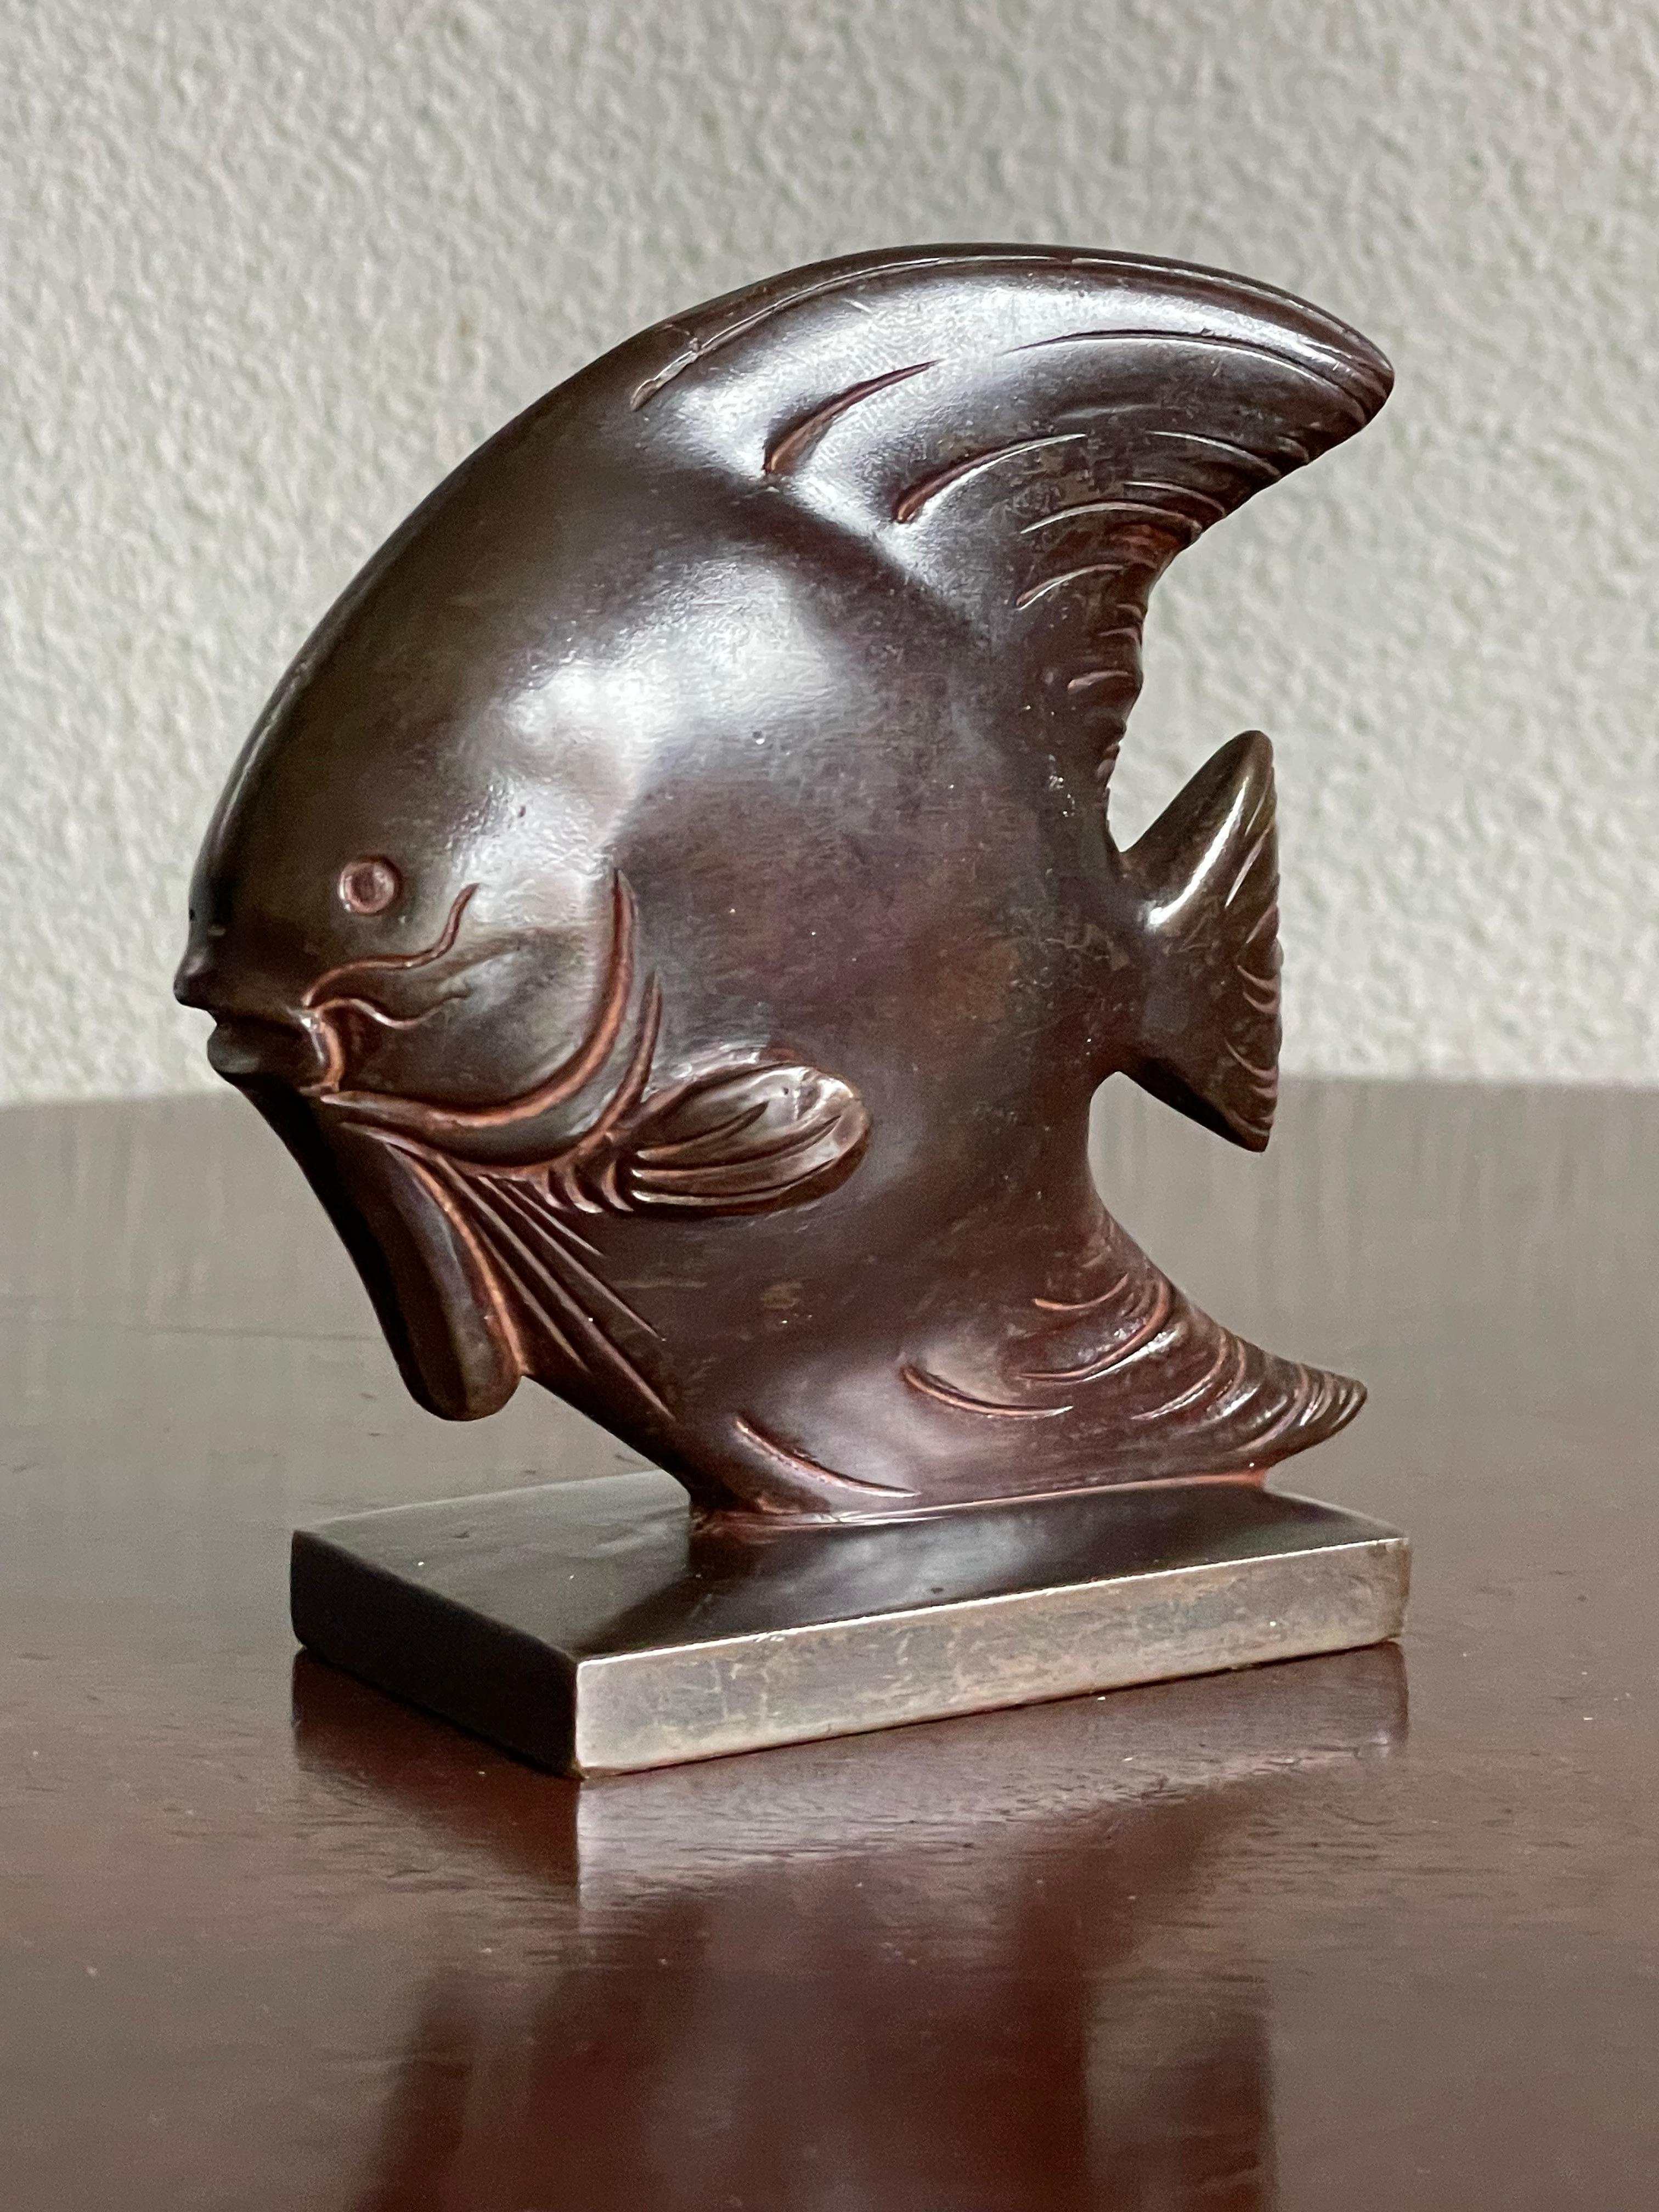 Aesthetically marvelous, small bronze discus fish sculpture.

This stunning, work-of-art, bronze 'symphysodon' (or discus fish) sculpture is another one of our recent great finds. If you have an eye for top quality hand-crafted sculptures of